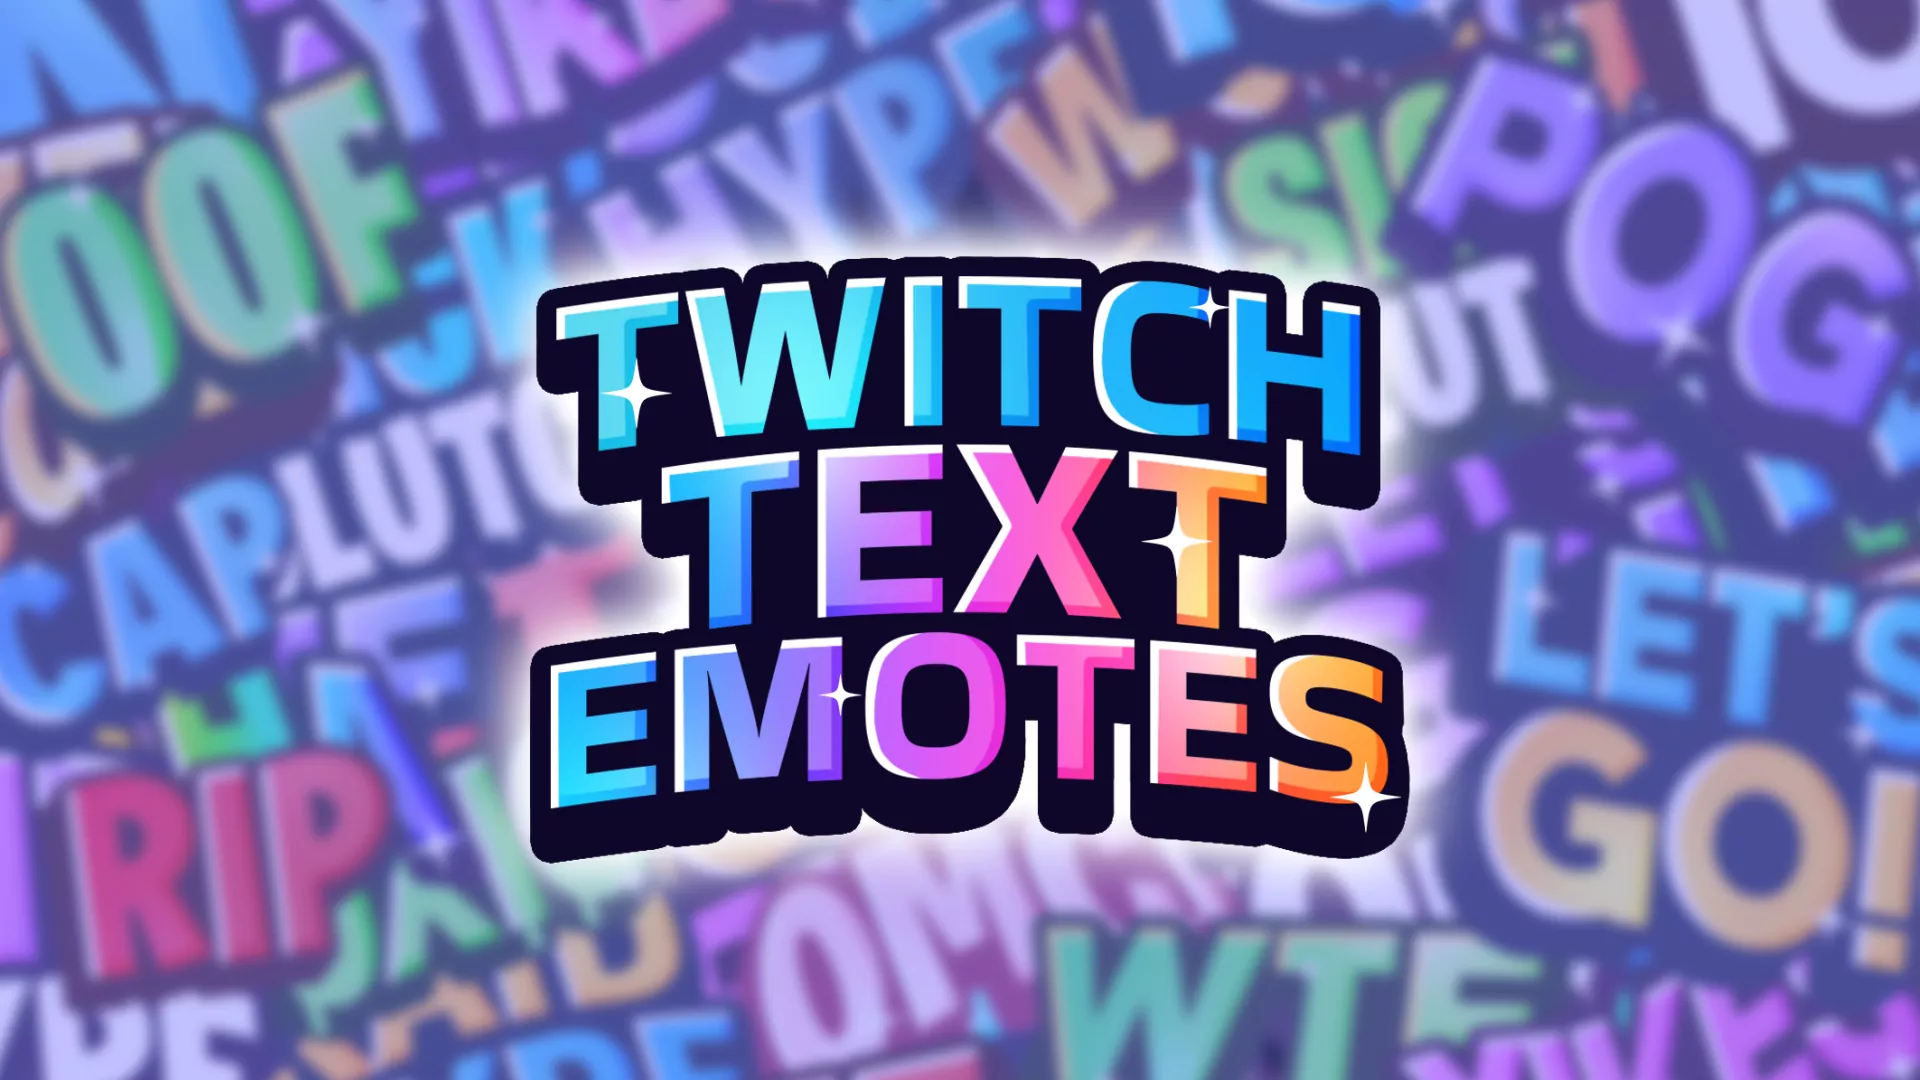 Twitch Text Emotes - Main Image